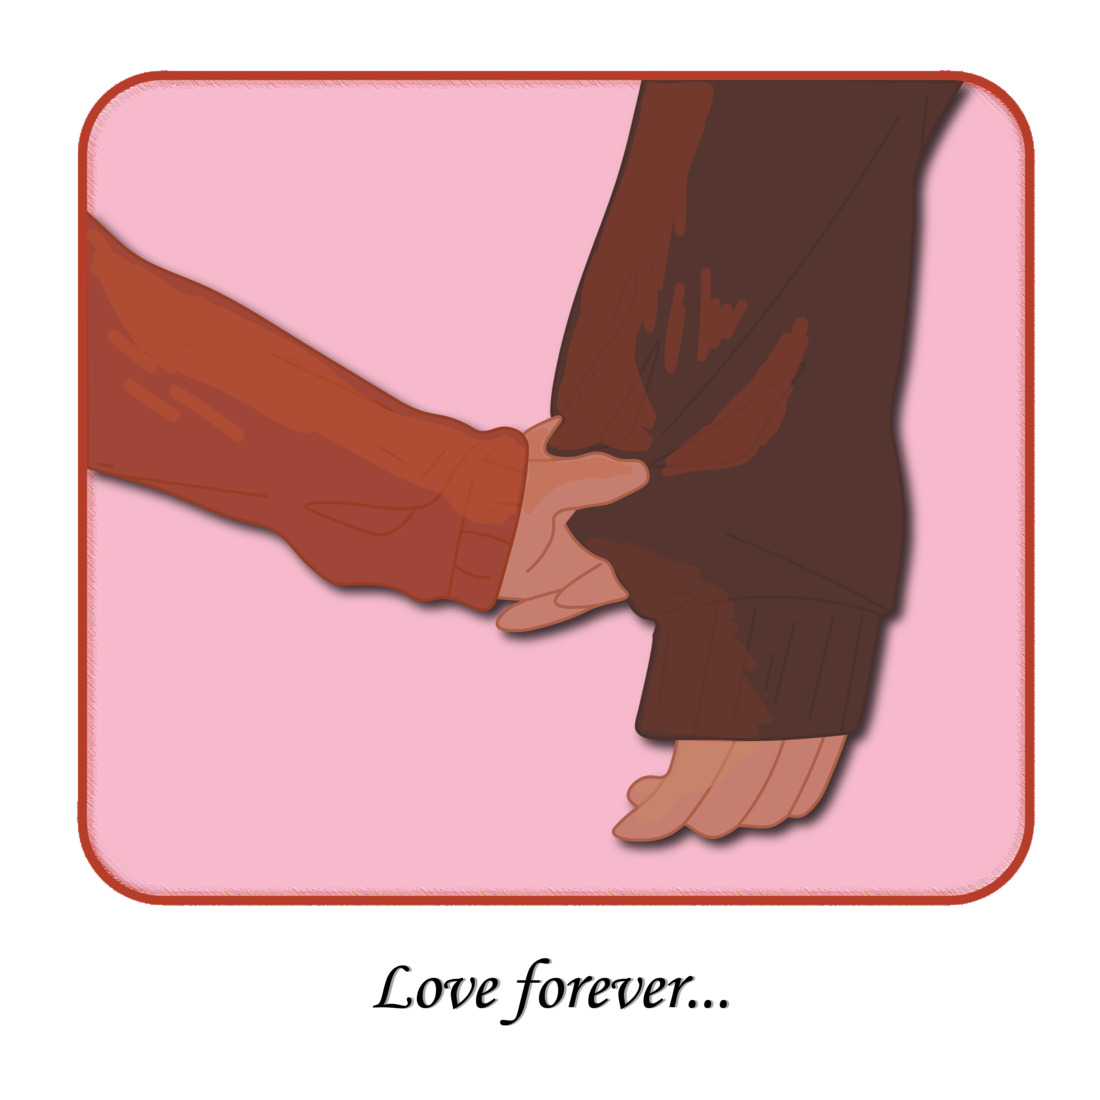 Love forever cover image.